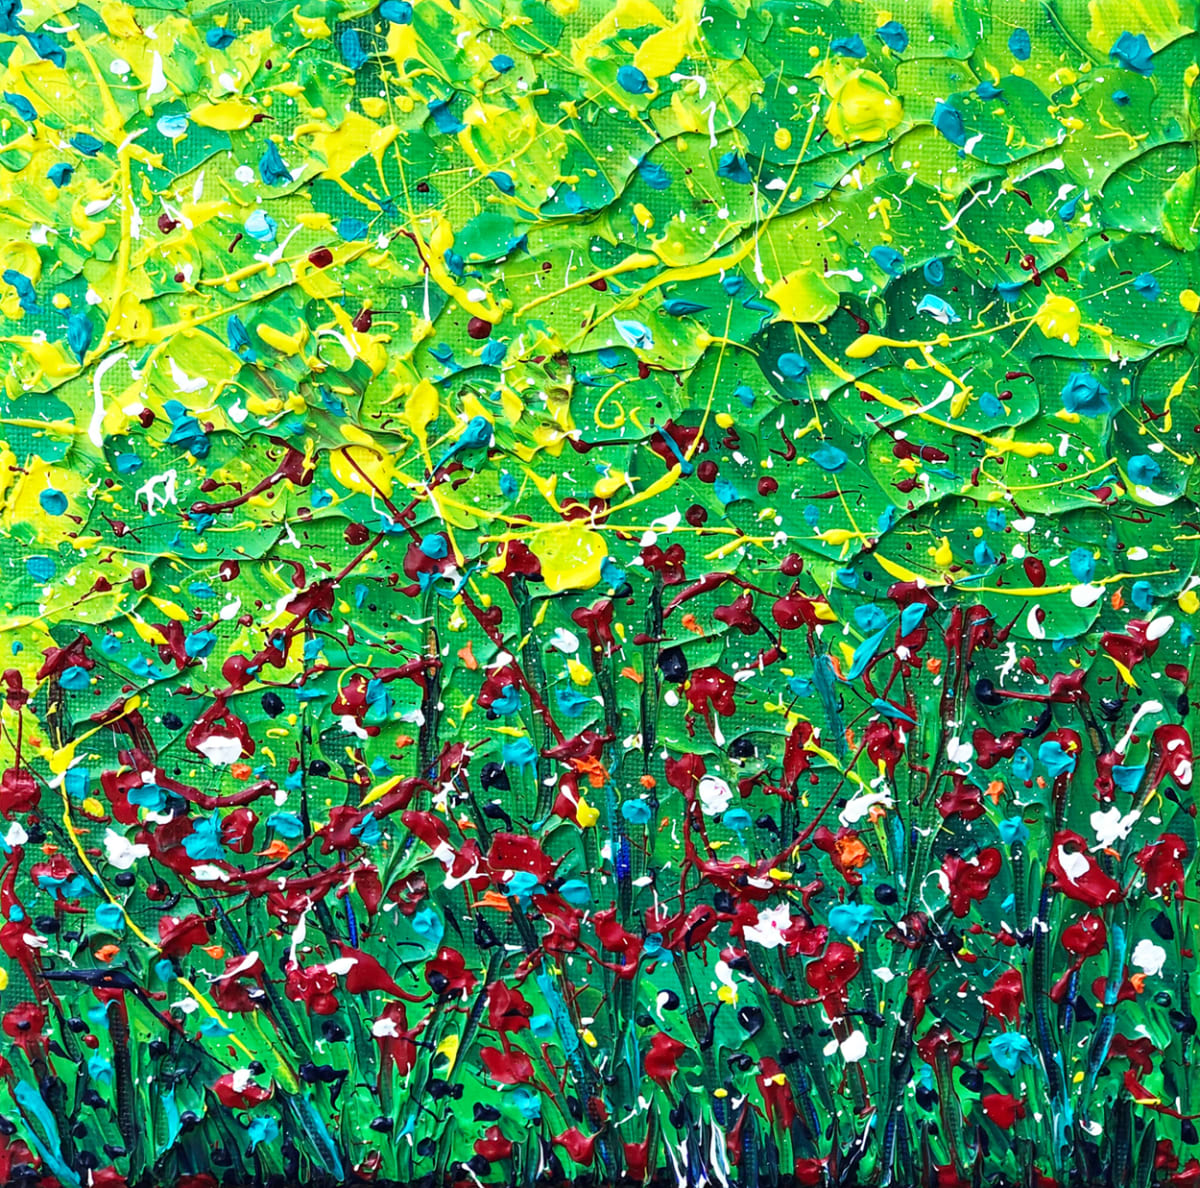 THE WILDFLOWERS by Bridget Bradley  Image: The Wildflowers - Abstract Expressionism - Textural  Painting - ©Bridget Bradley